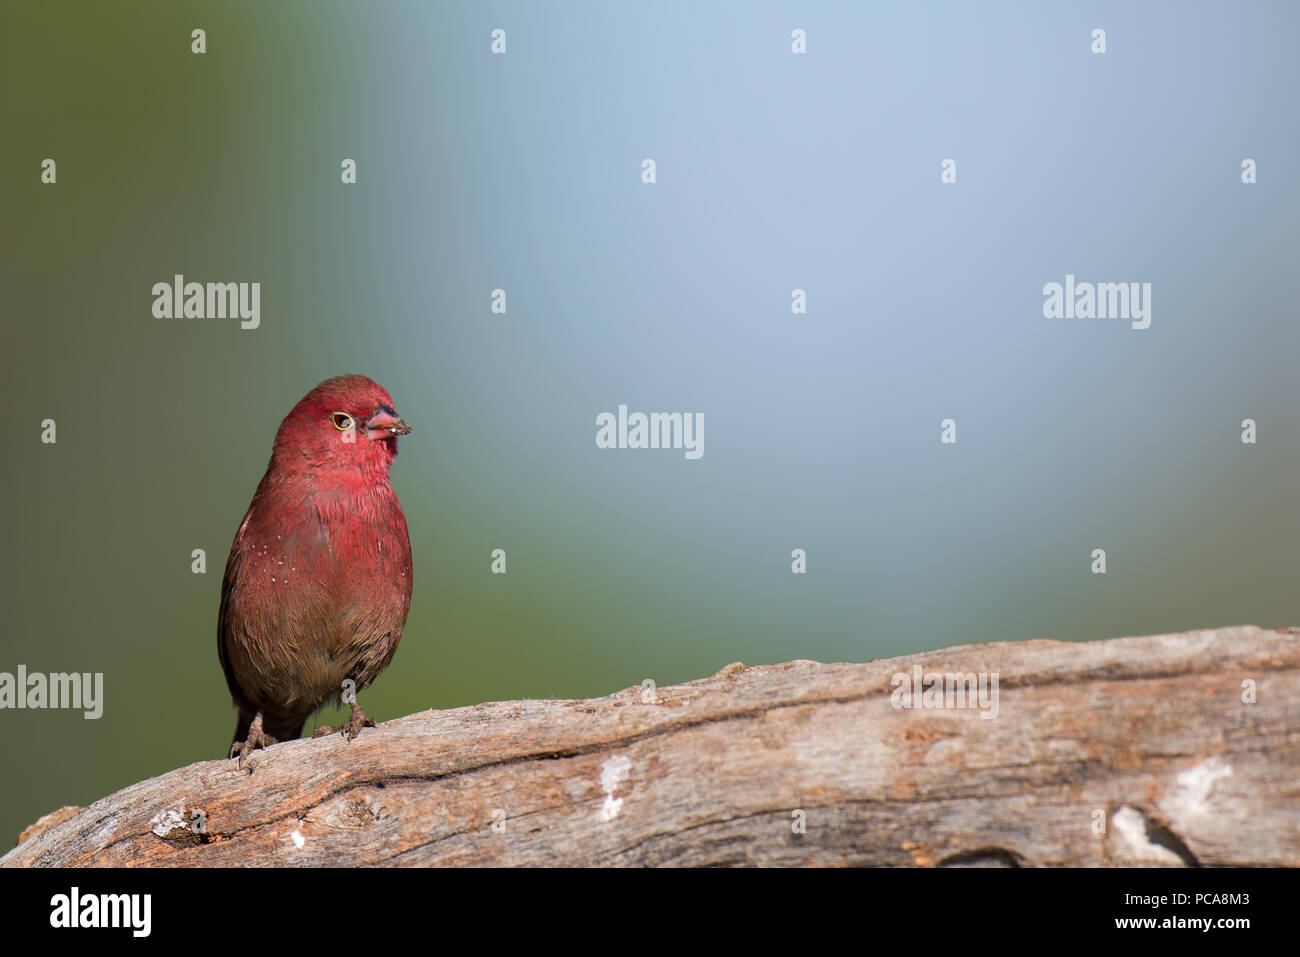 Finches Stock Photo